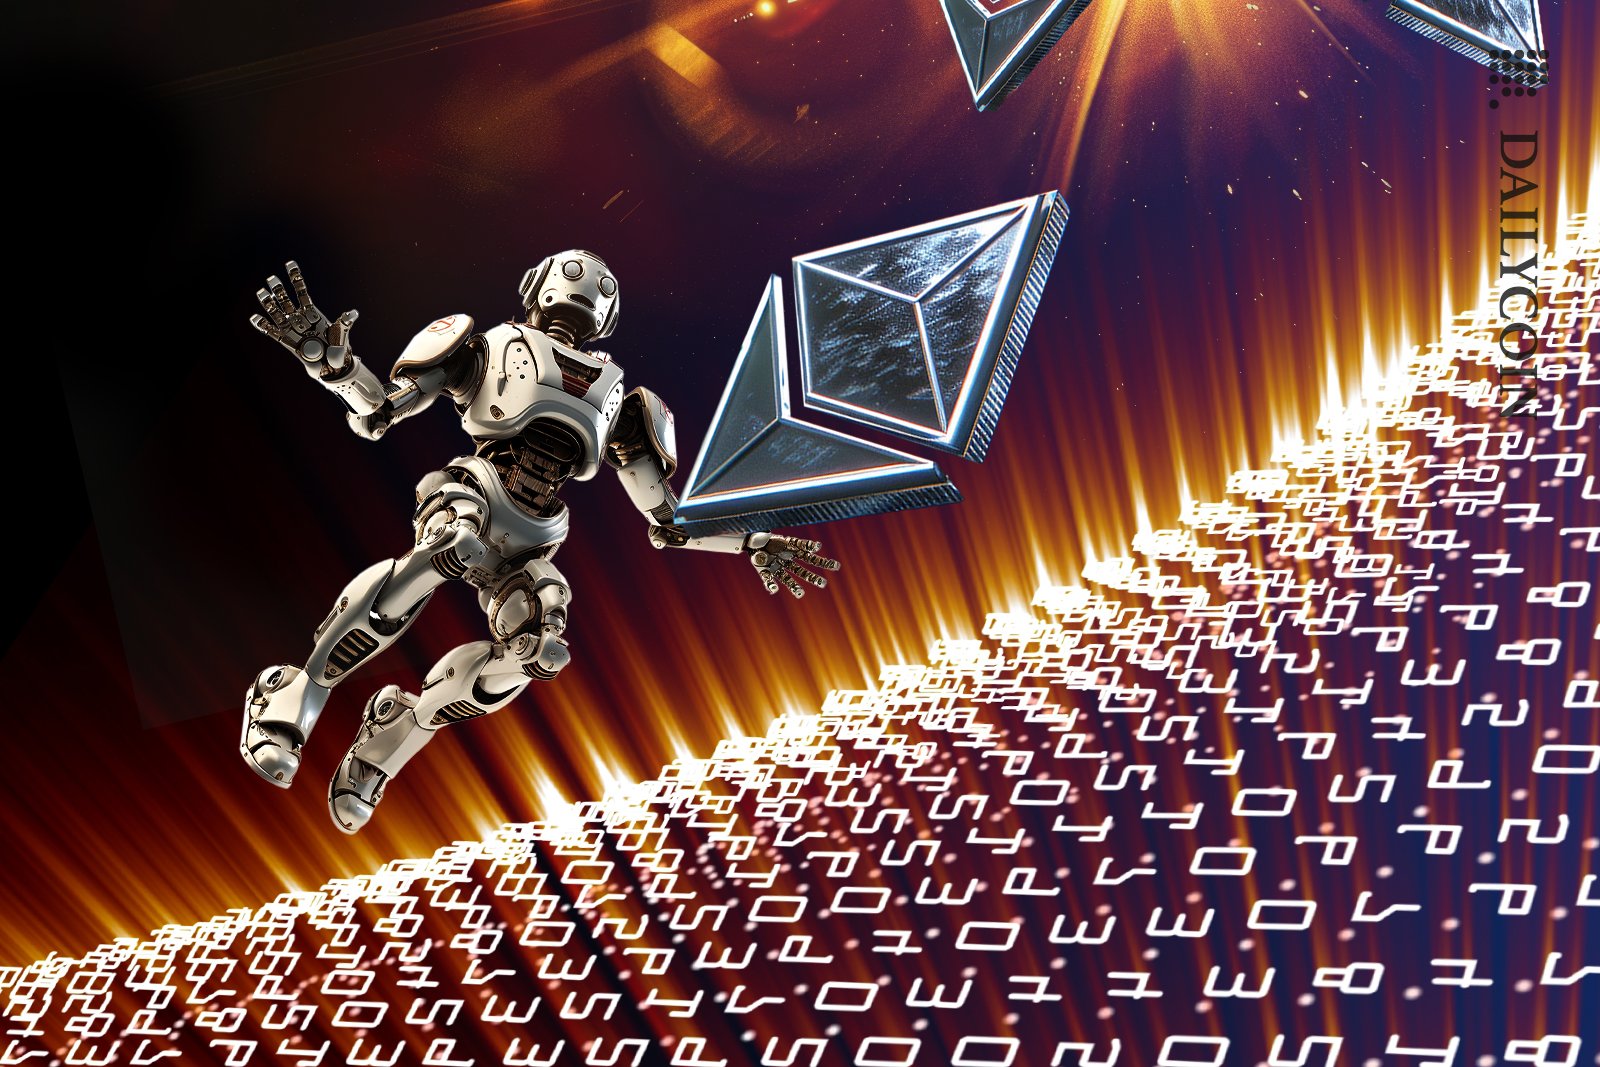 Robot jumping up in the air with ore of ethereum flying above the code.